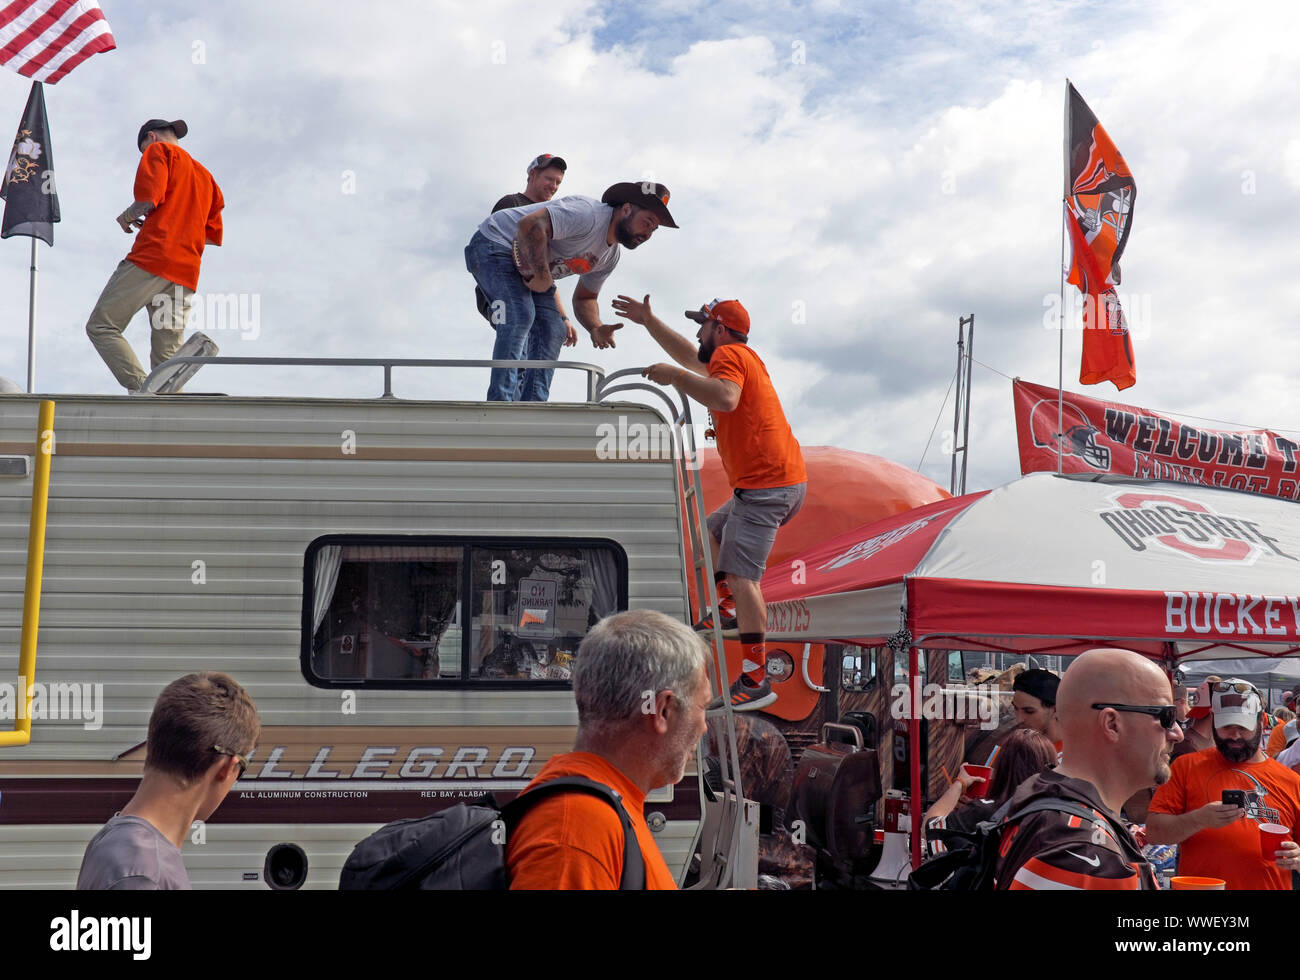 A group of Cleveland Browns Fans climb on an RV during tailgating festivities in the Muni Lot of Cleveland, Ohio, USA before a home game. Stock Photo